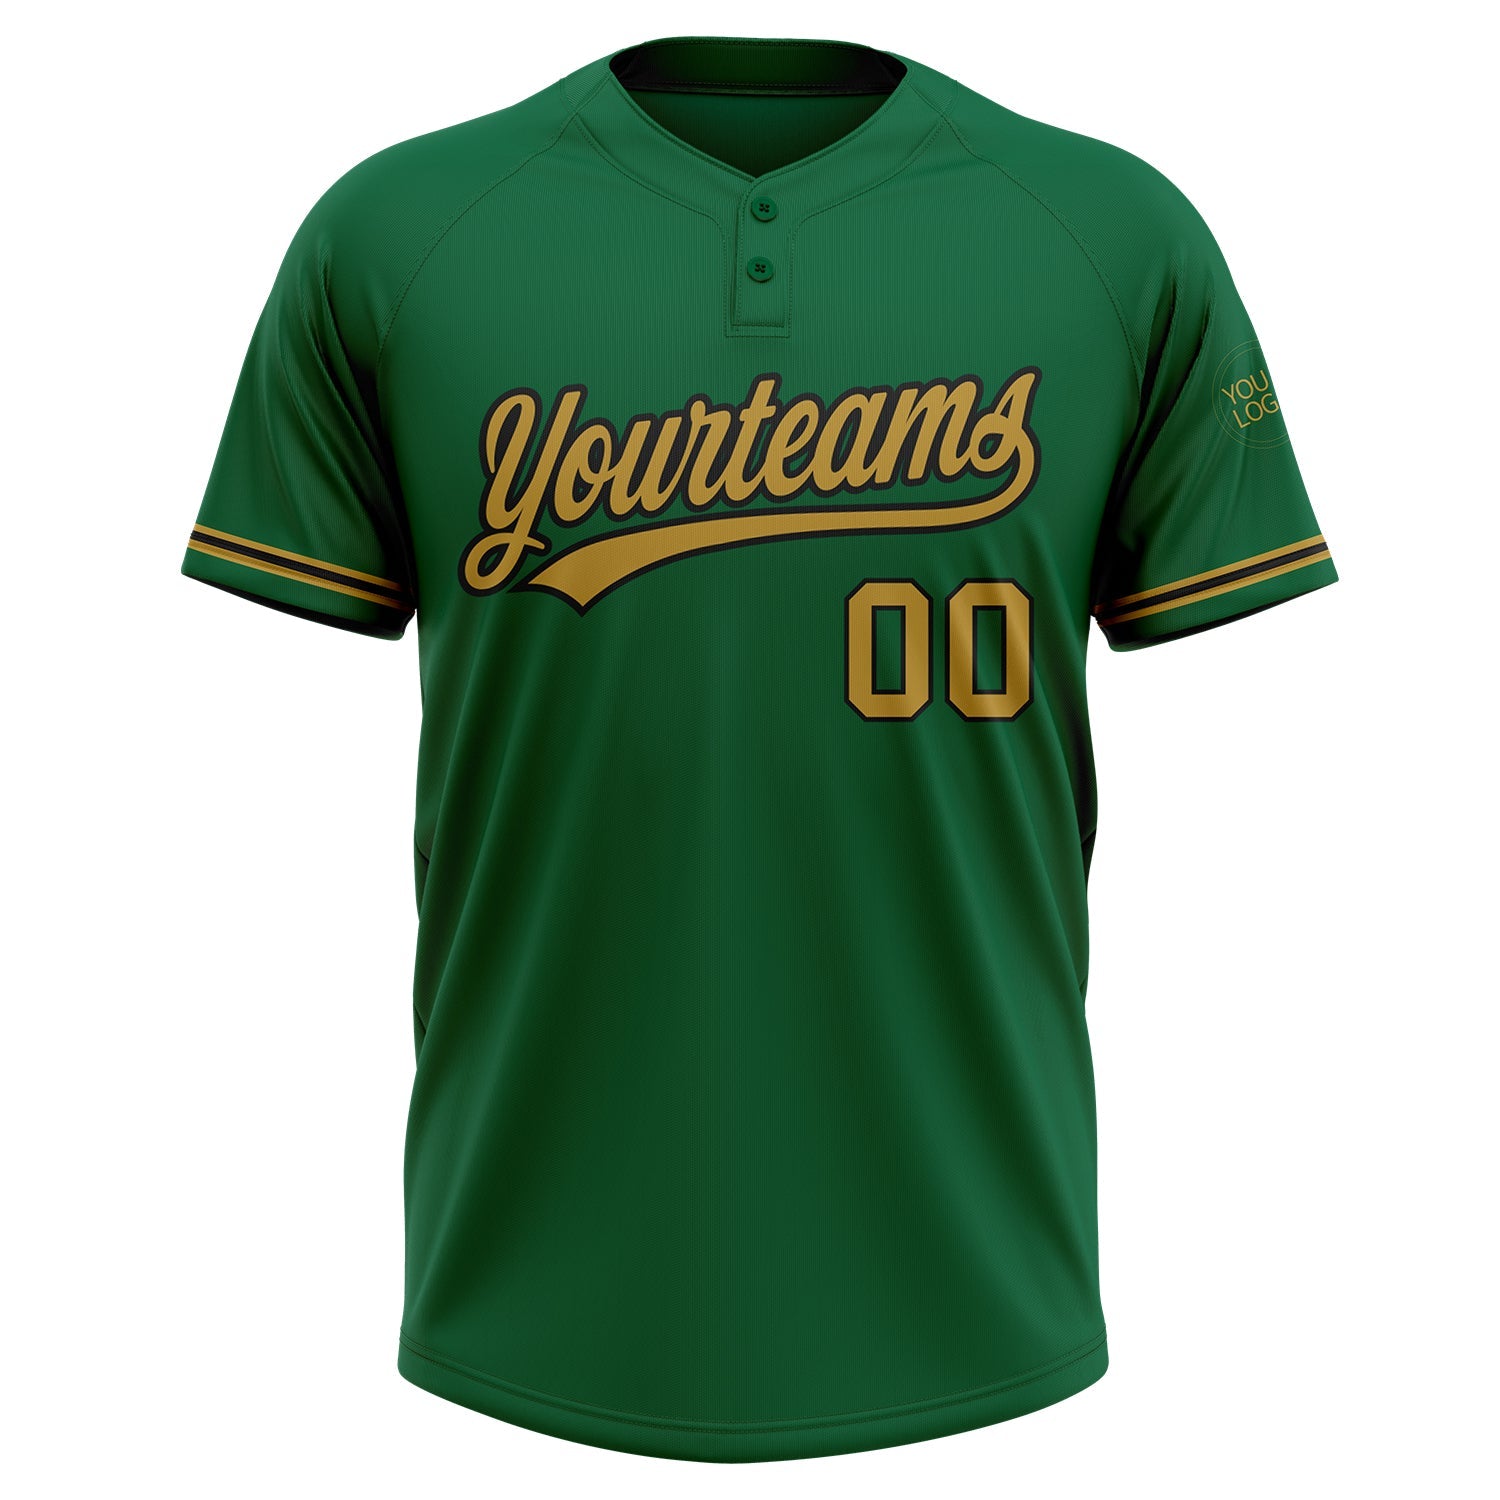 Custom Kelly Green Old Gold-Black Two-Button Unisex Softball Jersey